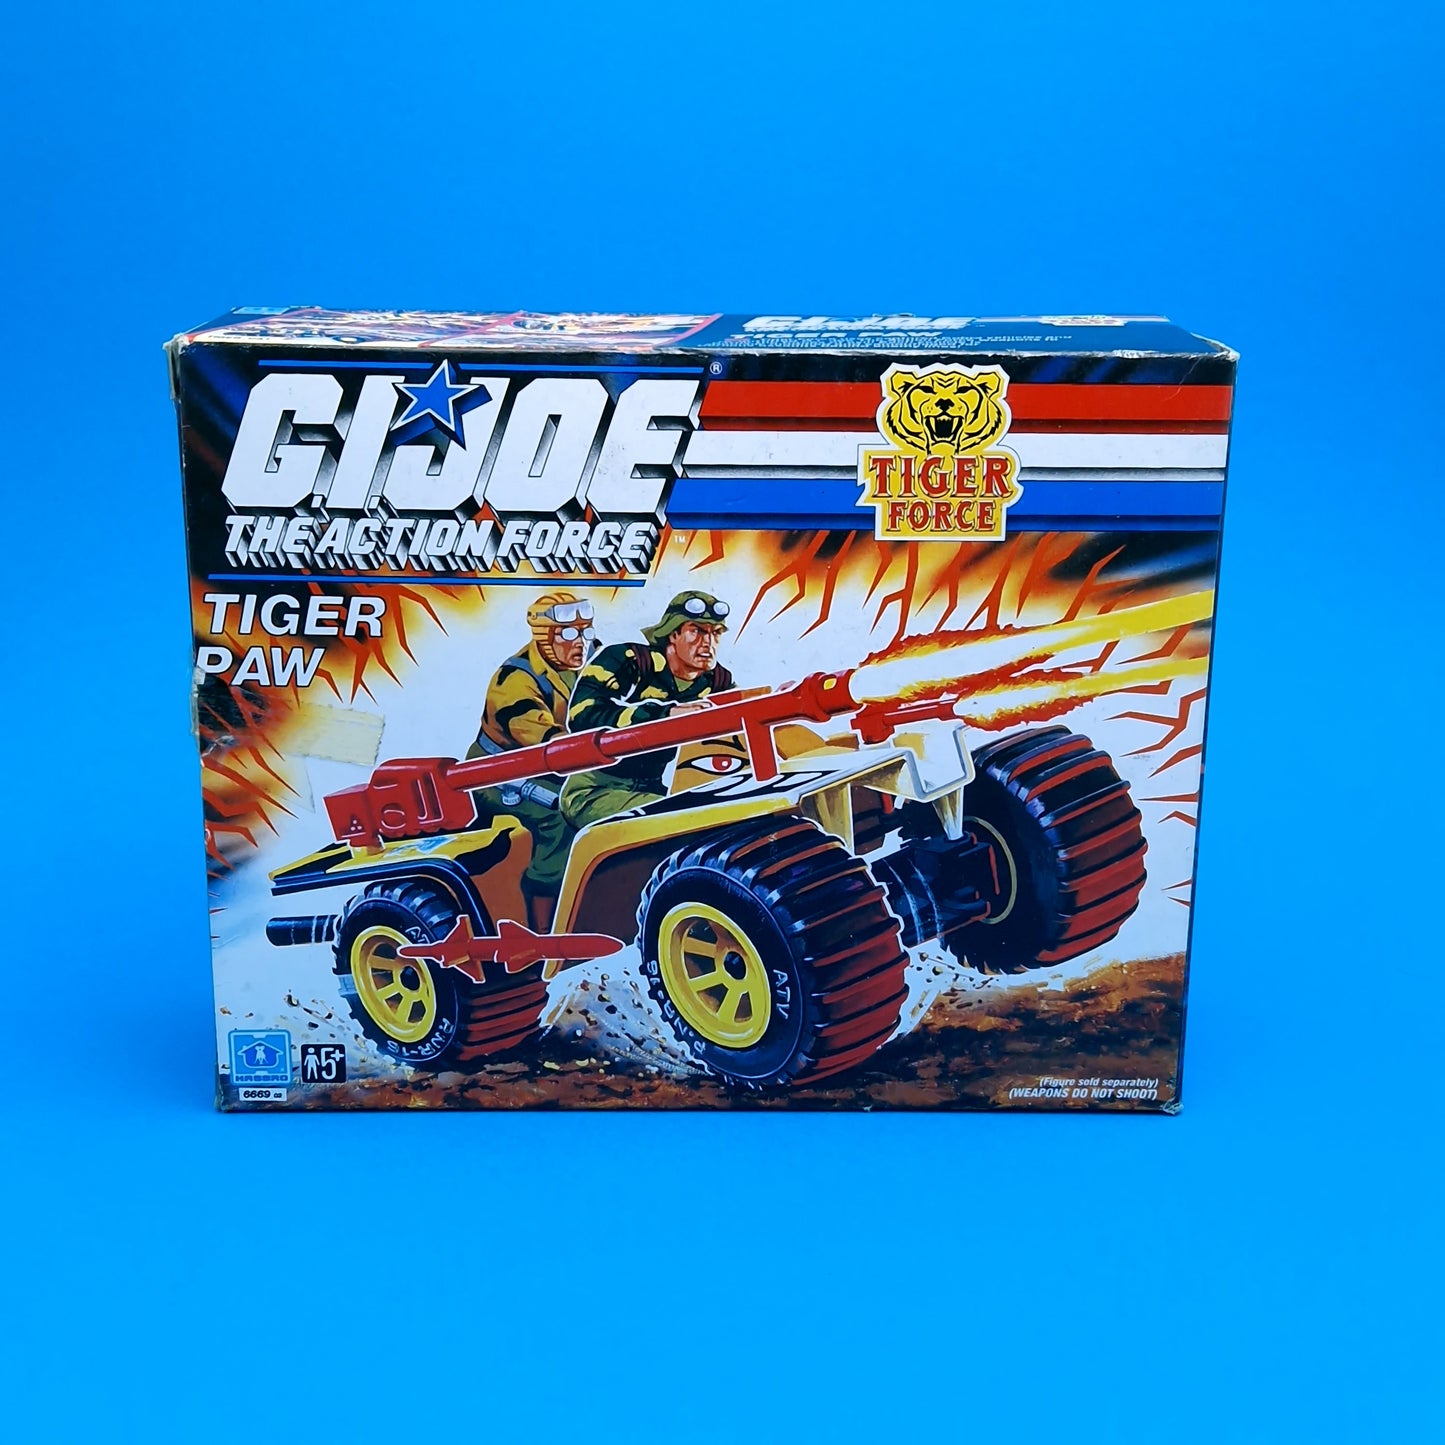 ACTION FORCE ☆ TIGER PAW Vehicle Complete BOXED ☆ TIGER FORCE G.I.JOE Hasbro 1989